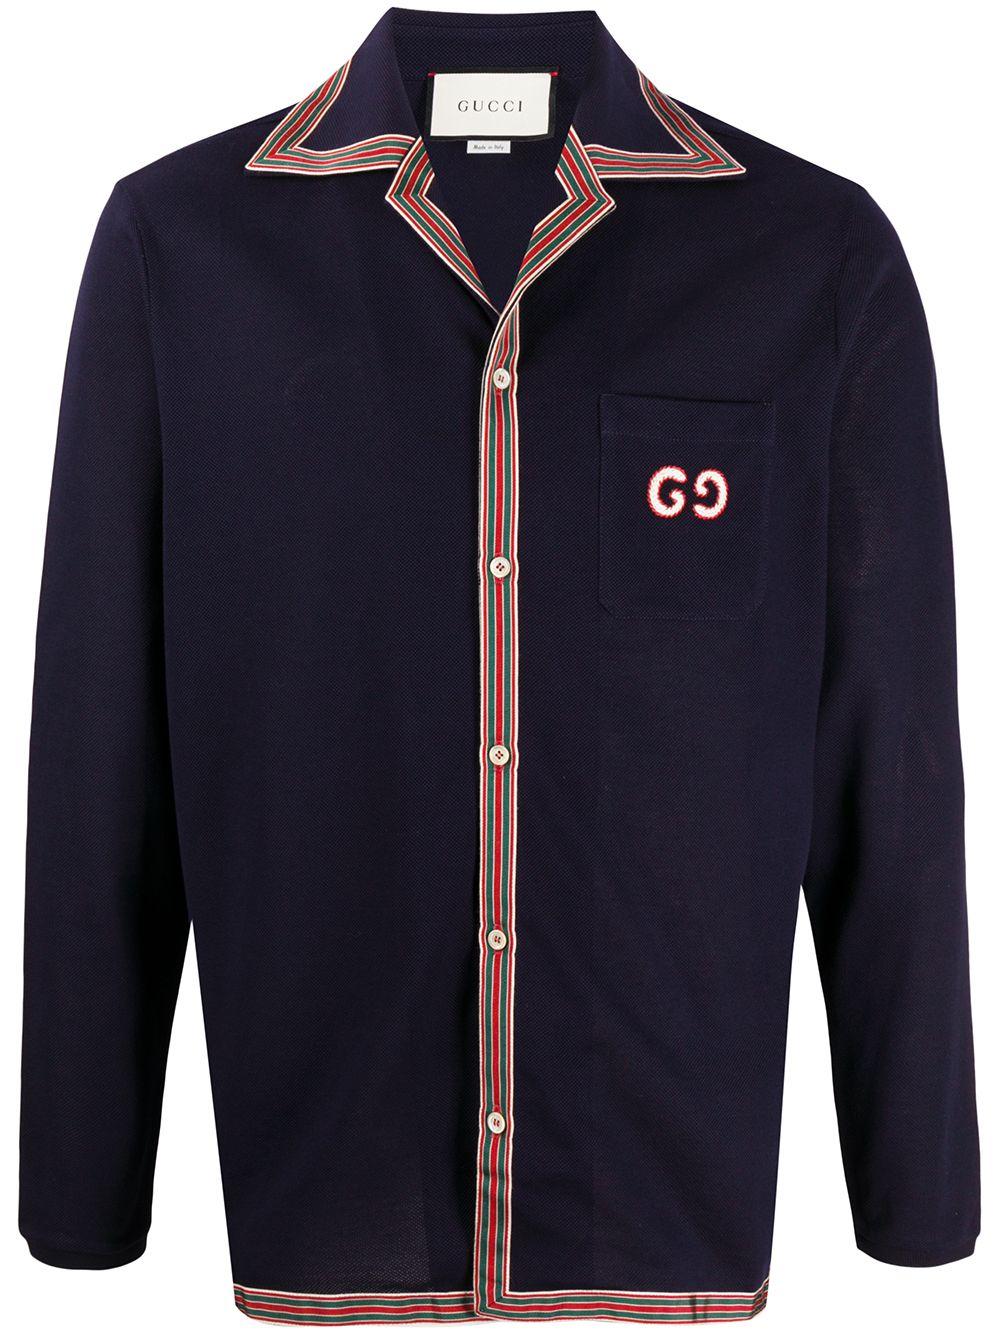 Gucci Cotton Long-sleeved Polo in for Men - Lyst